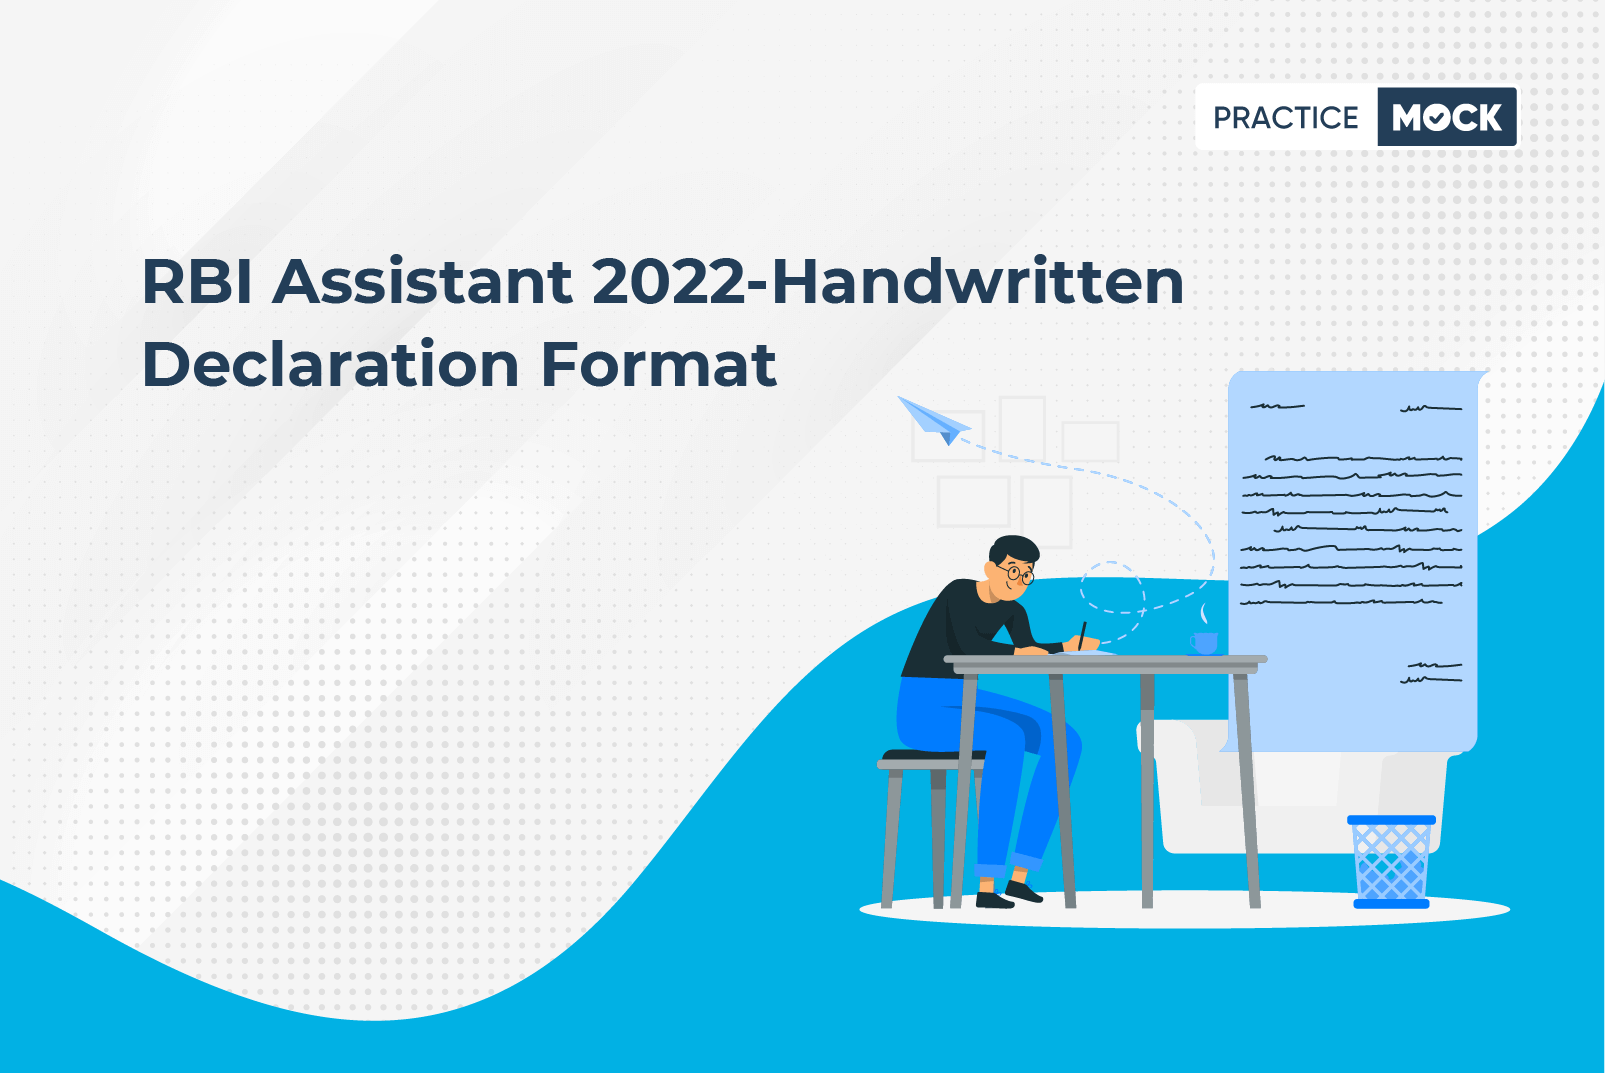 RBI Assistant Hand Written Declaration 2022 PDF- How to write it?